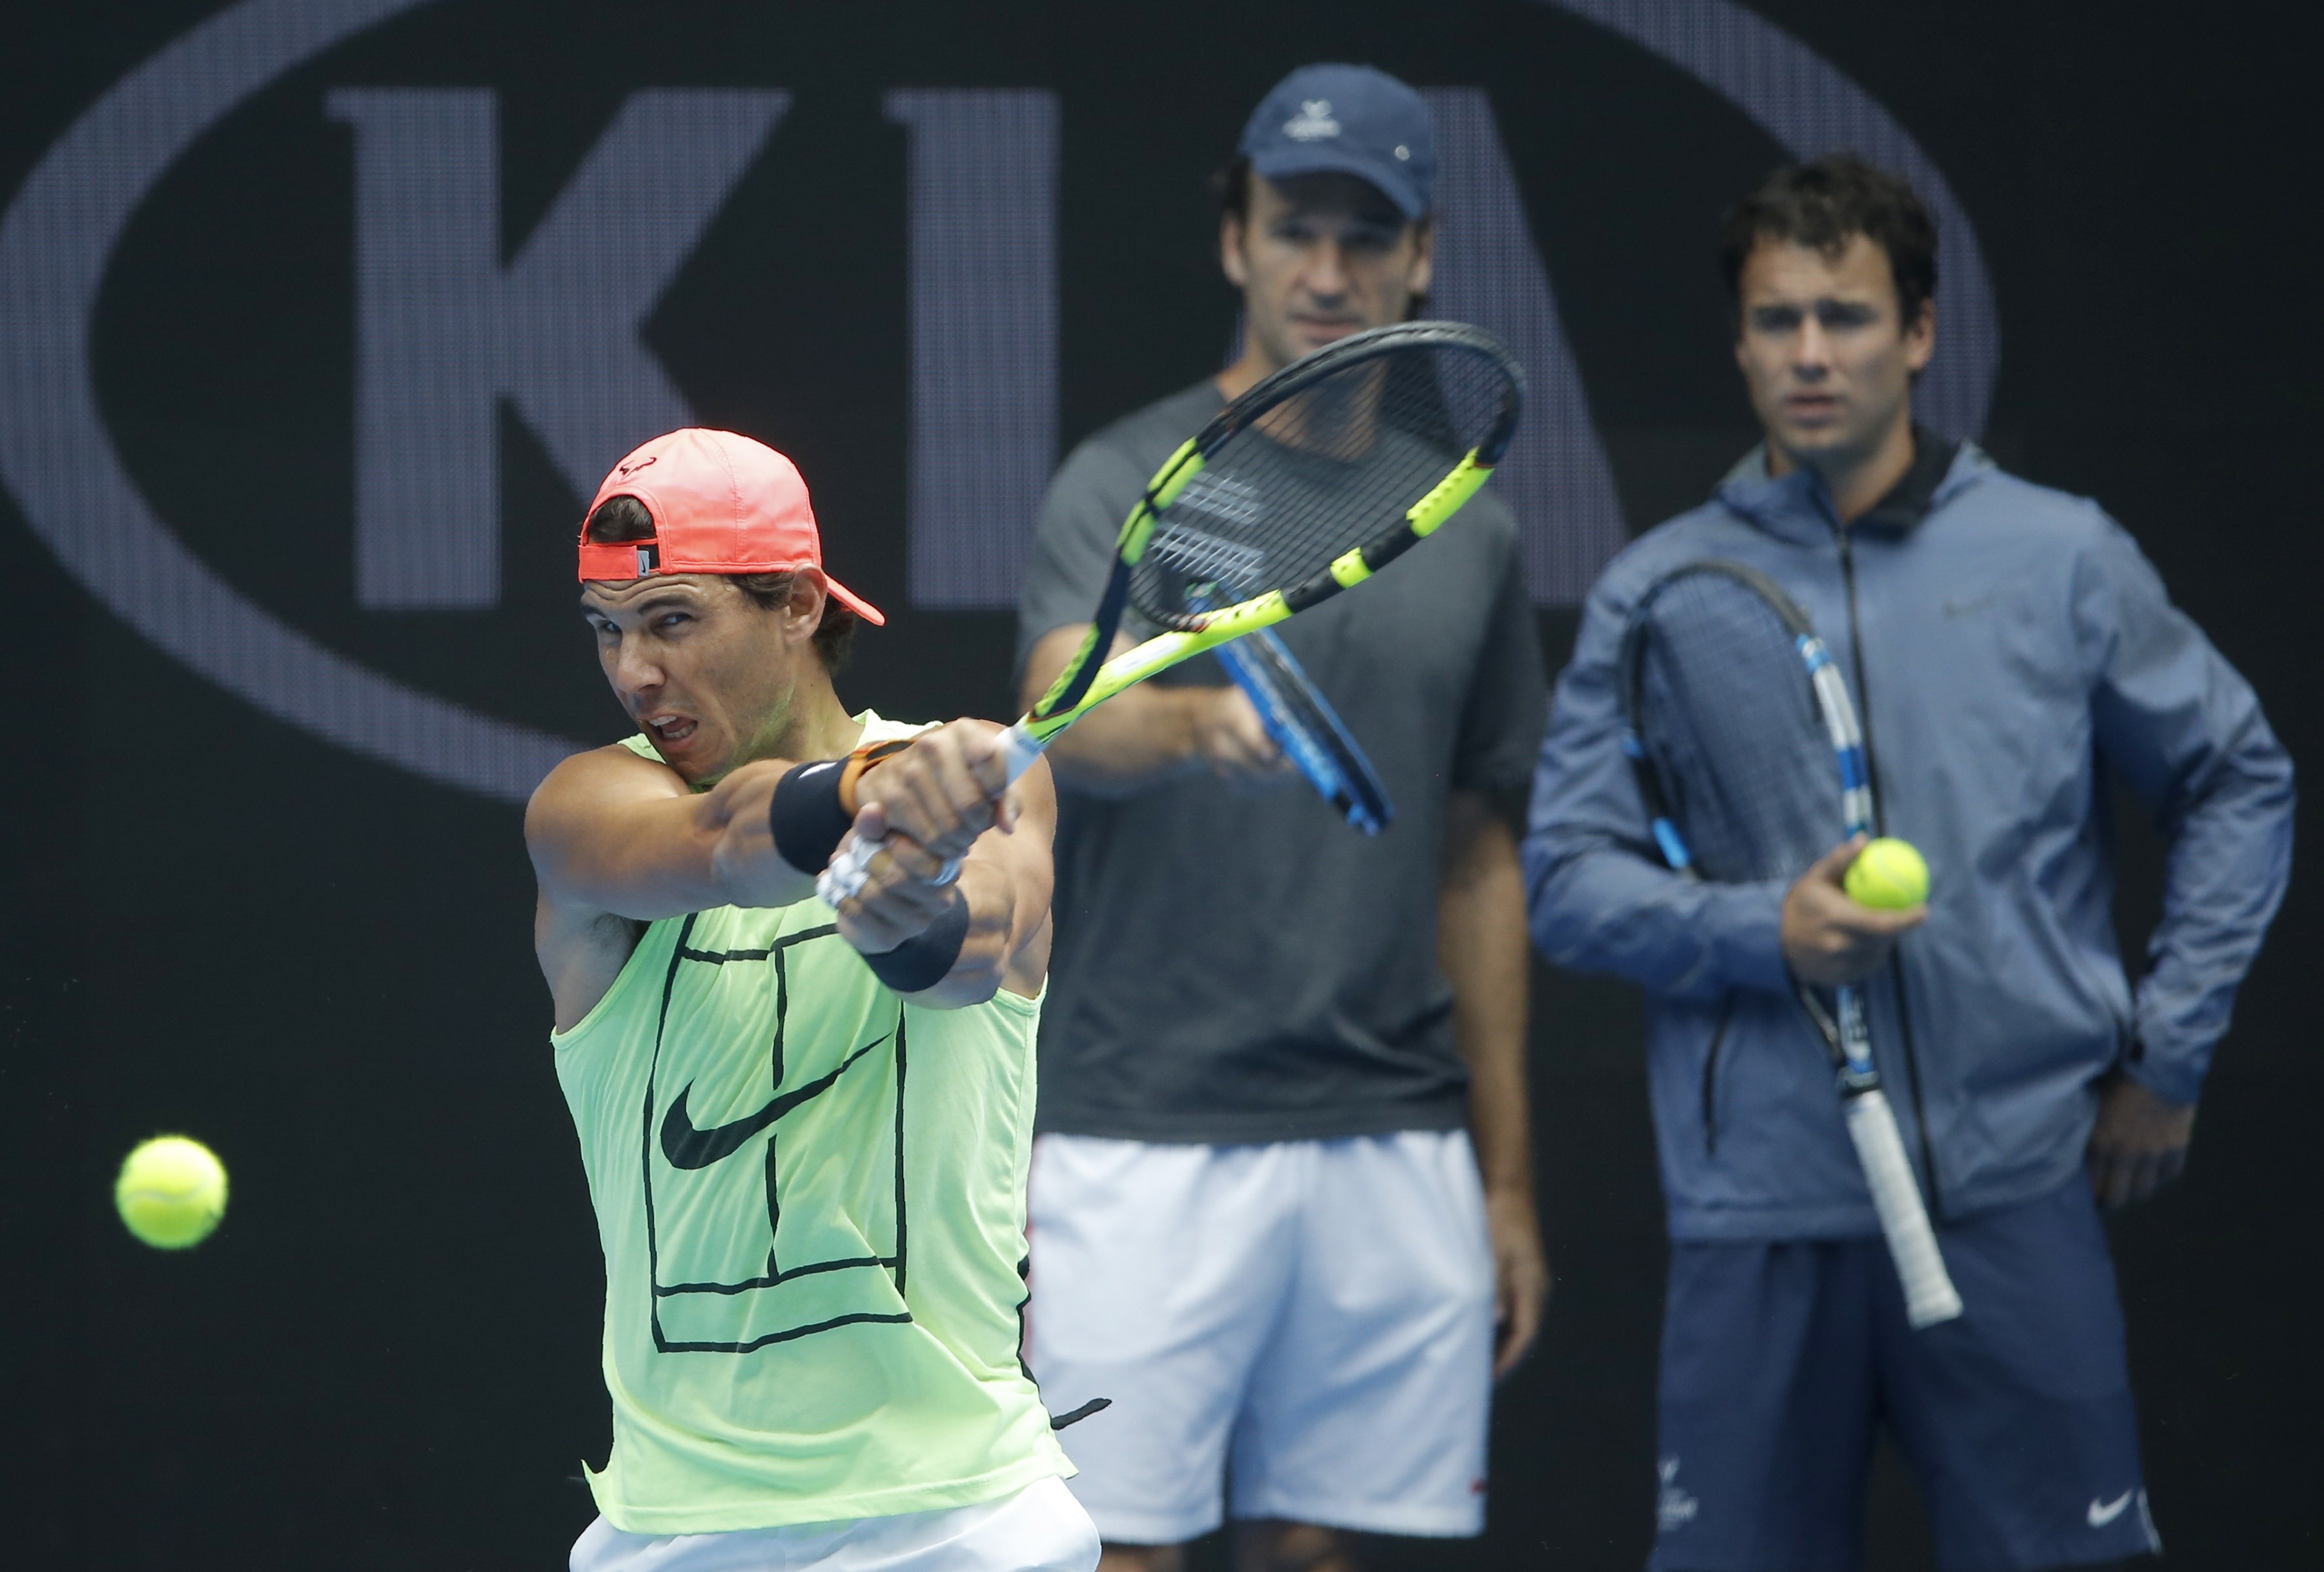 Tennis: Uncle Toni still 'more than anything' for Nadal